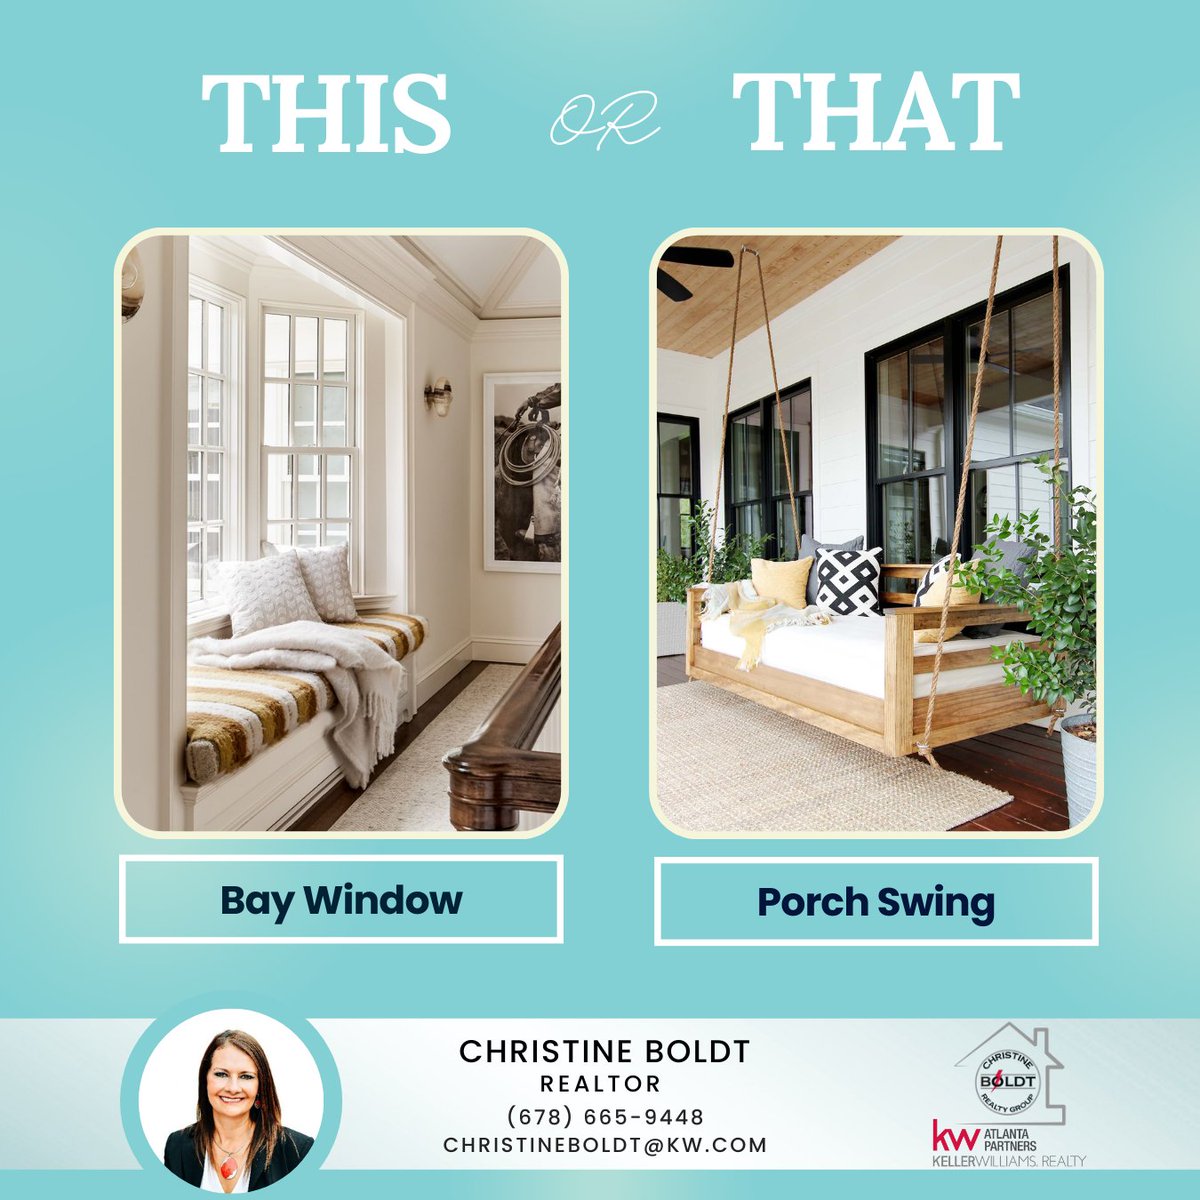 It's all about finding that perfect spot to unwind. 🪟🪴

Are you team #PorchSwing for the cozy sway, or team #BayWindow for a scenic escape? 🏡🌅

#ChooseThursday #ThisorThat #PorchSwing #BayWindow #relaxingspot #realestateagent #realtorsofinstagram #christineboldtrealtygroup